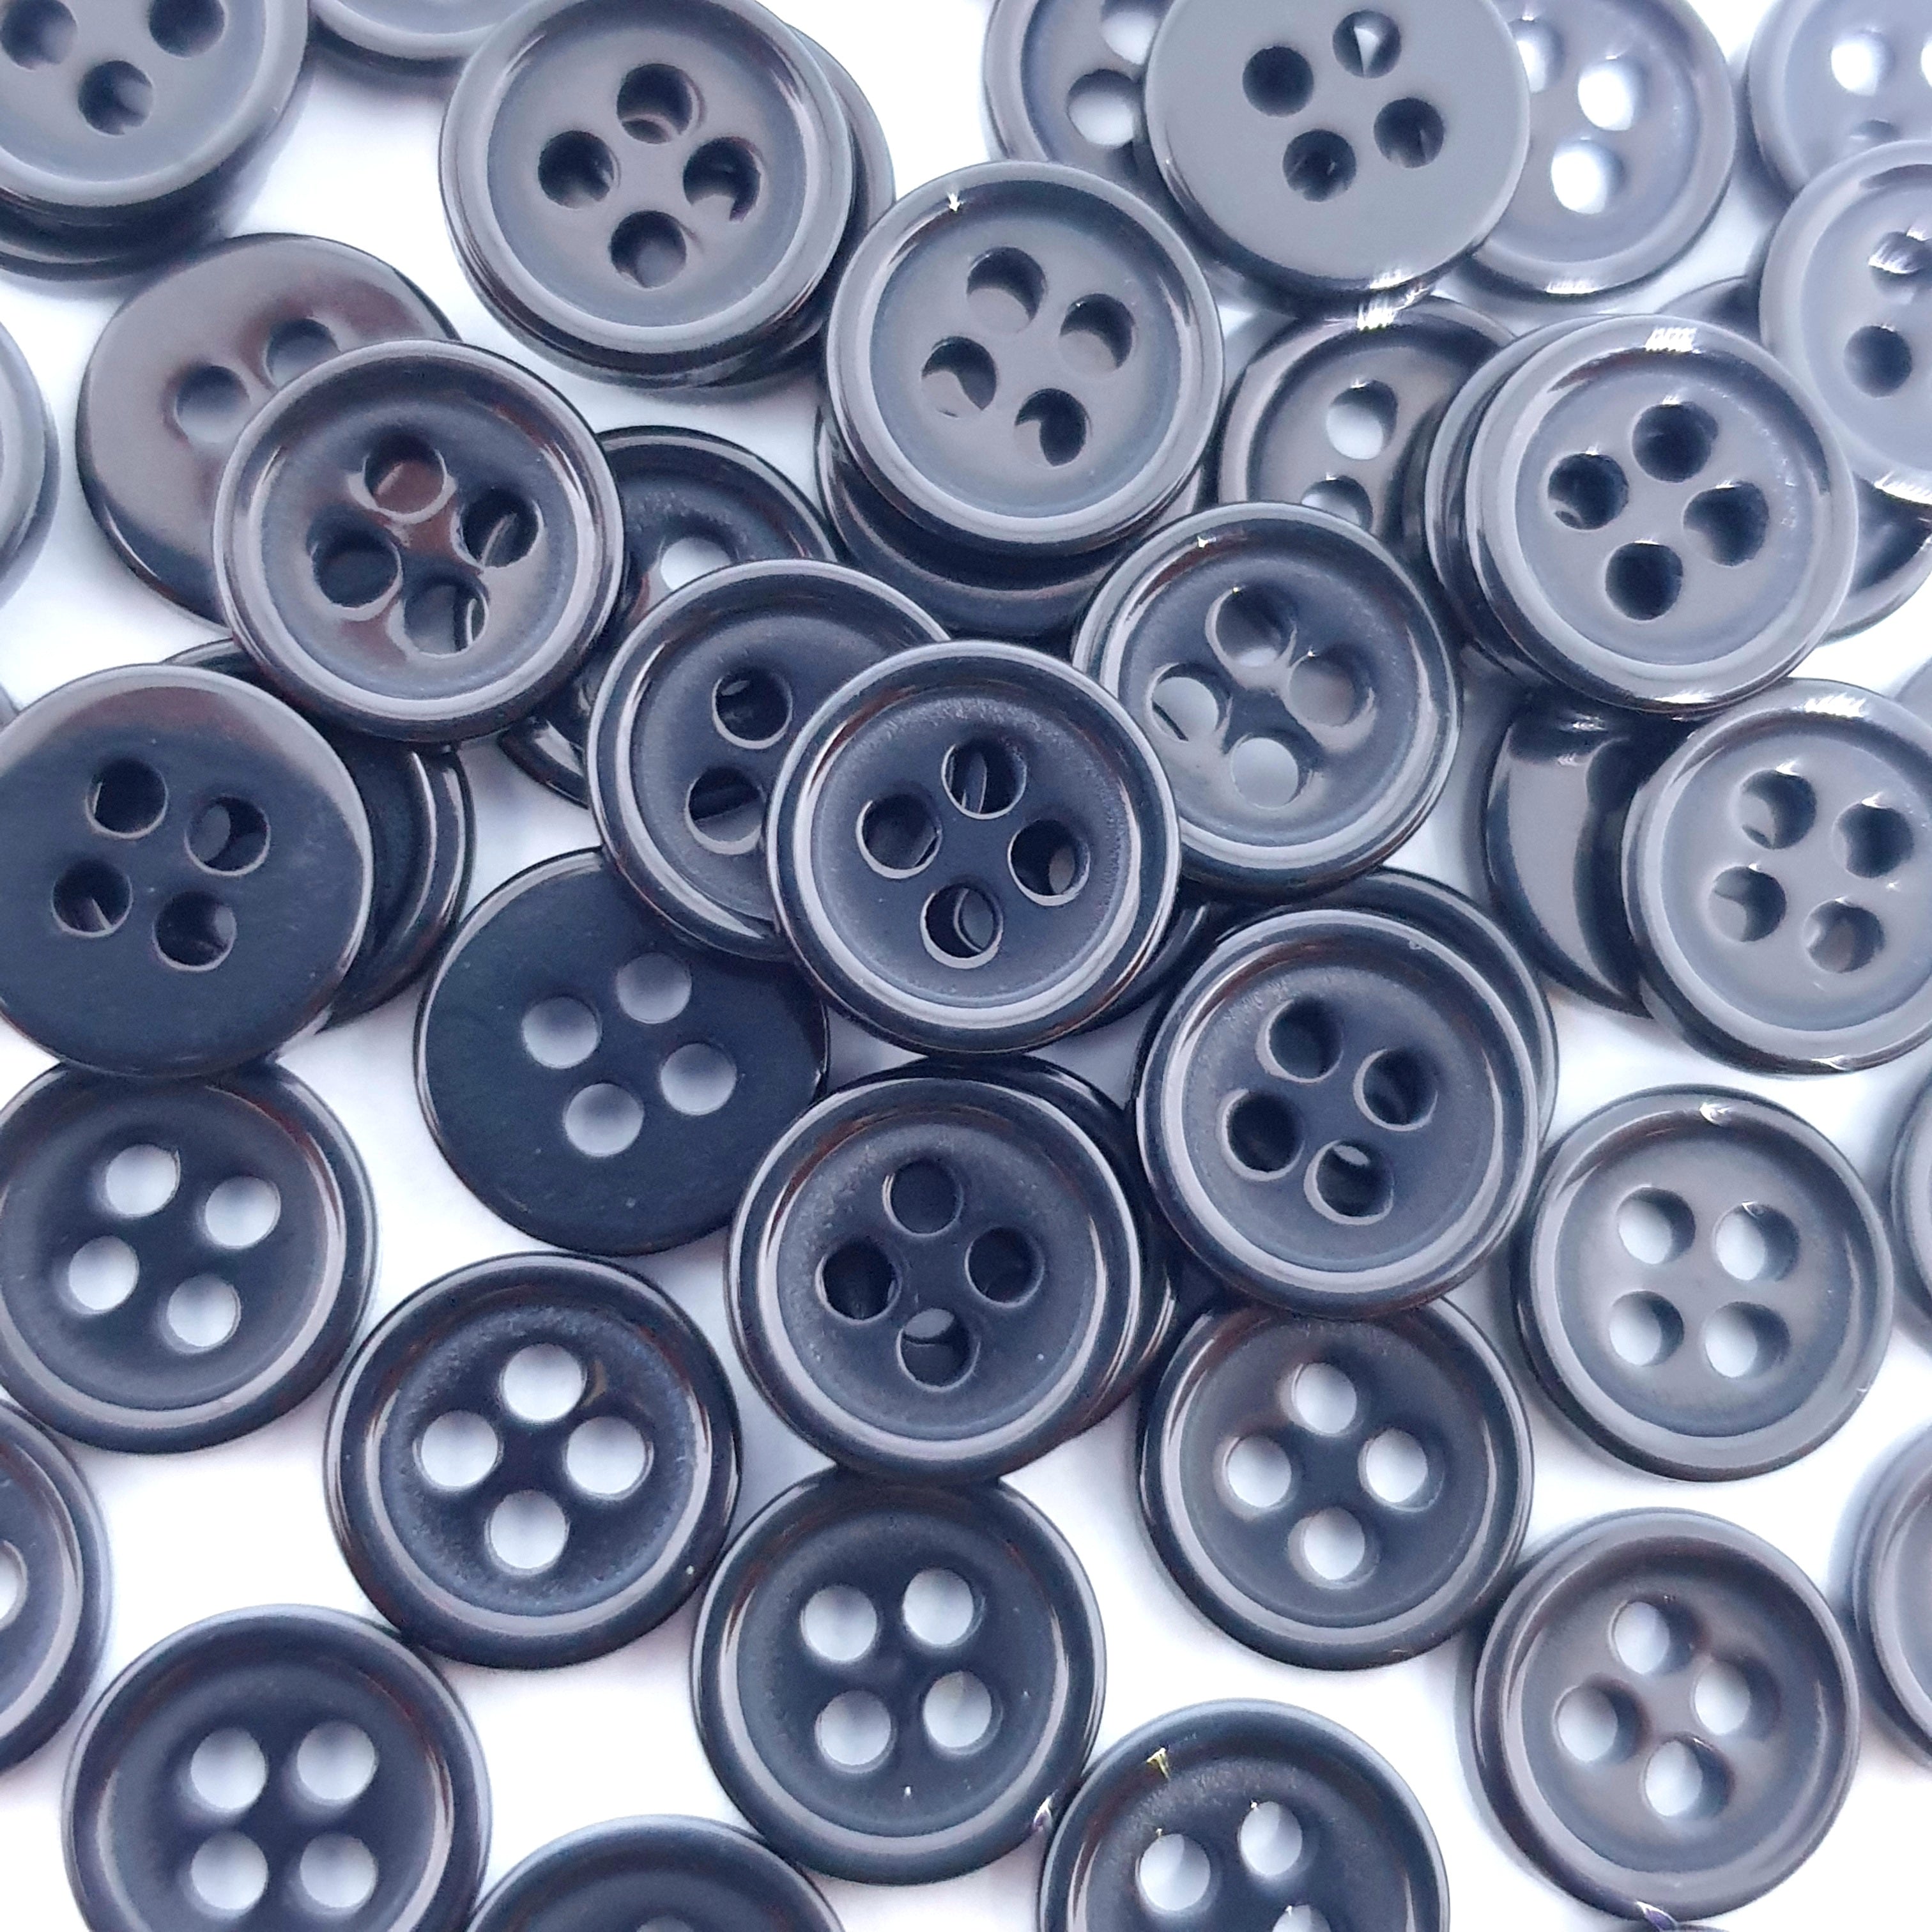 MajorCrafts 120pcs 9mm Black 4 Holes Small Round Resin Sewing Buttons